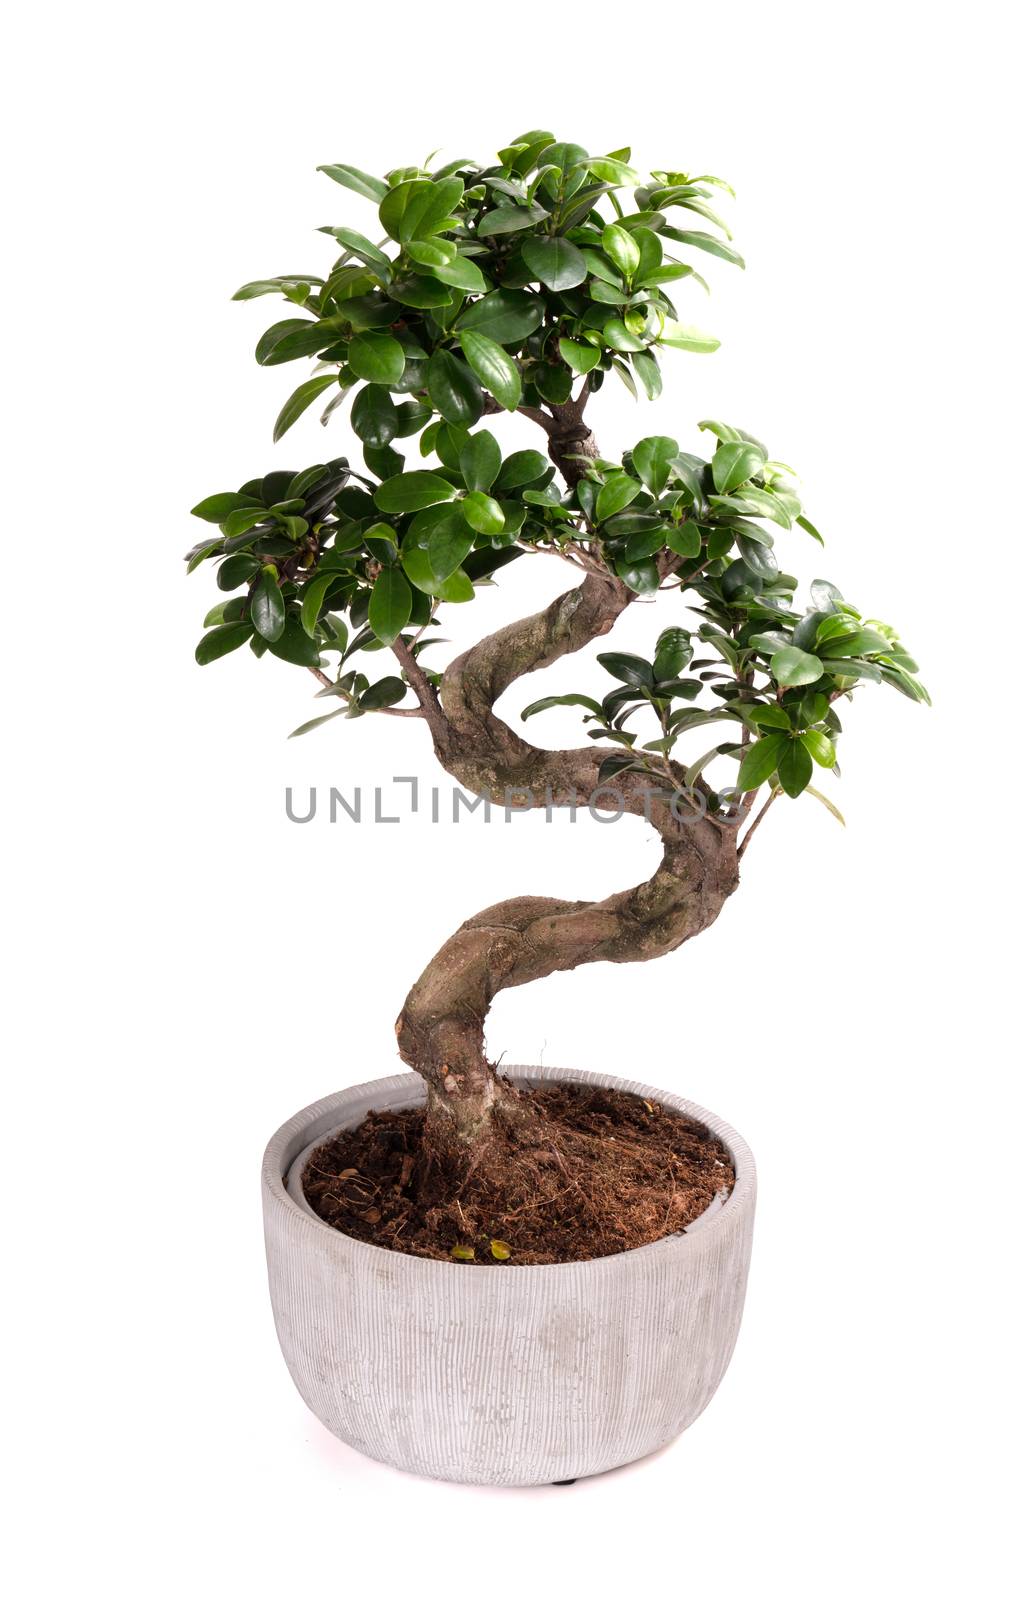 Bonsai tree potted plant, isolated on white